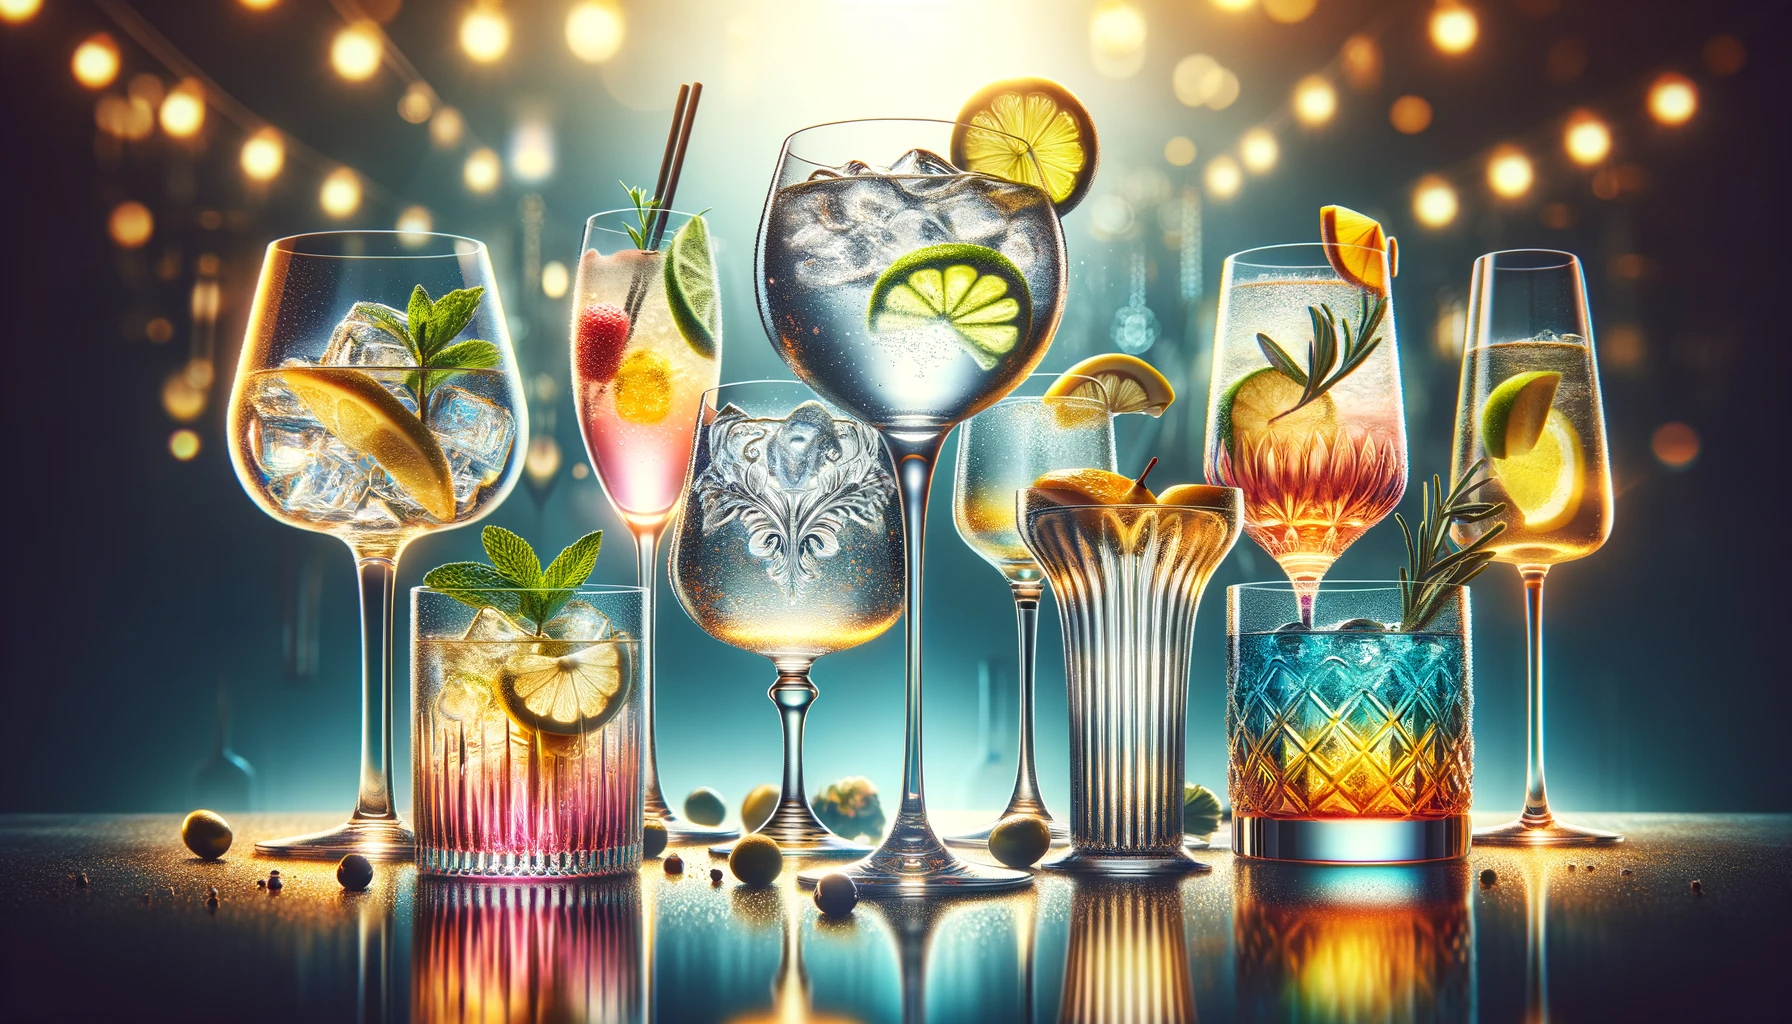 https://ginobserver.com/wp-content/uploads/2019/06/DALL%C2%B7E-2023-11-30-22.56.53-An-exquisite-selection-of-gin-glasses-each-showcasing-a-unique-cocktail-in-a-brighter-and-more-vivid-setting.-Include-a-polished-Copa-glass-with-a-s.png